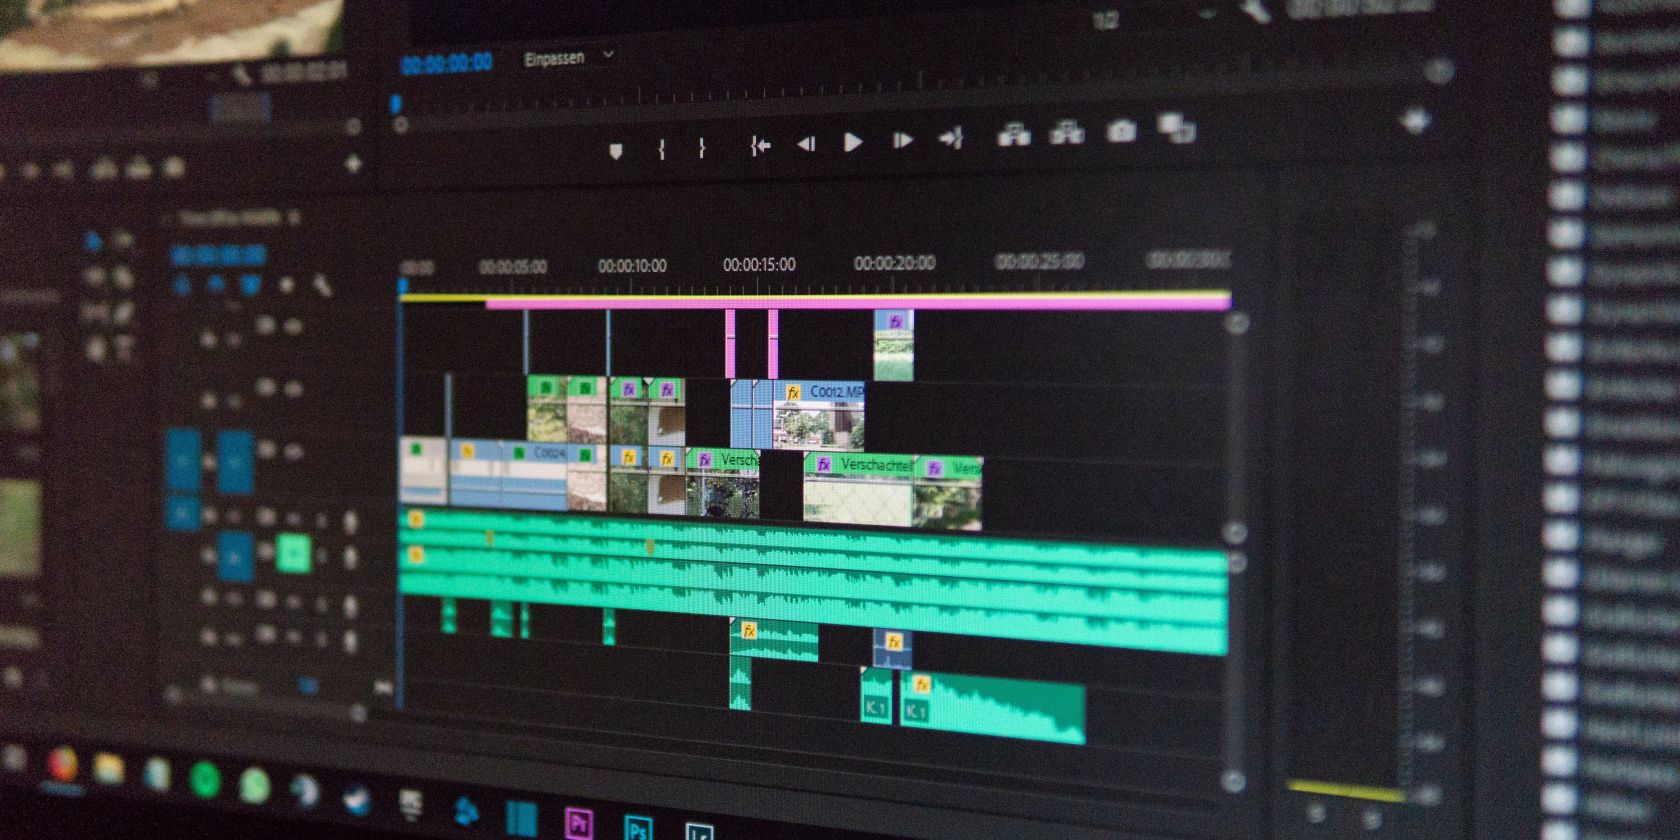 Editing professionally in Premiere Pro with three-point editing.